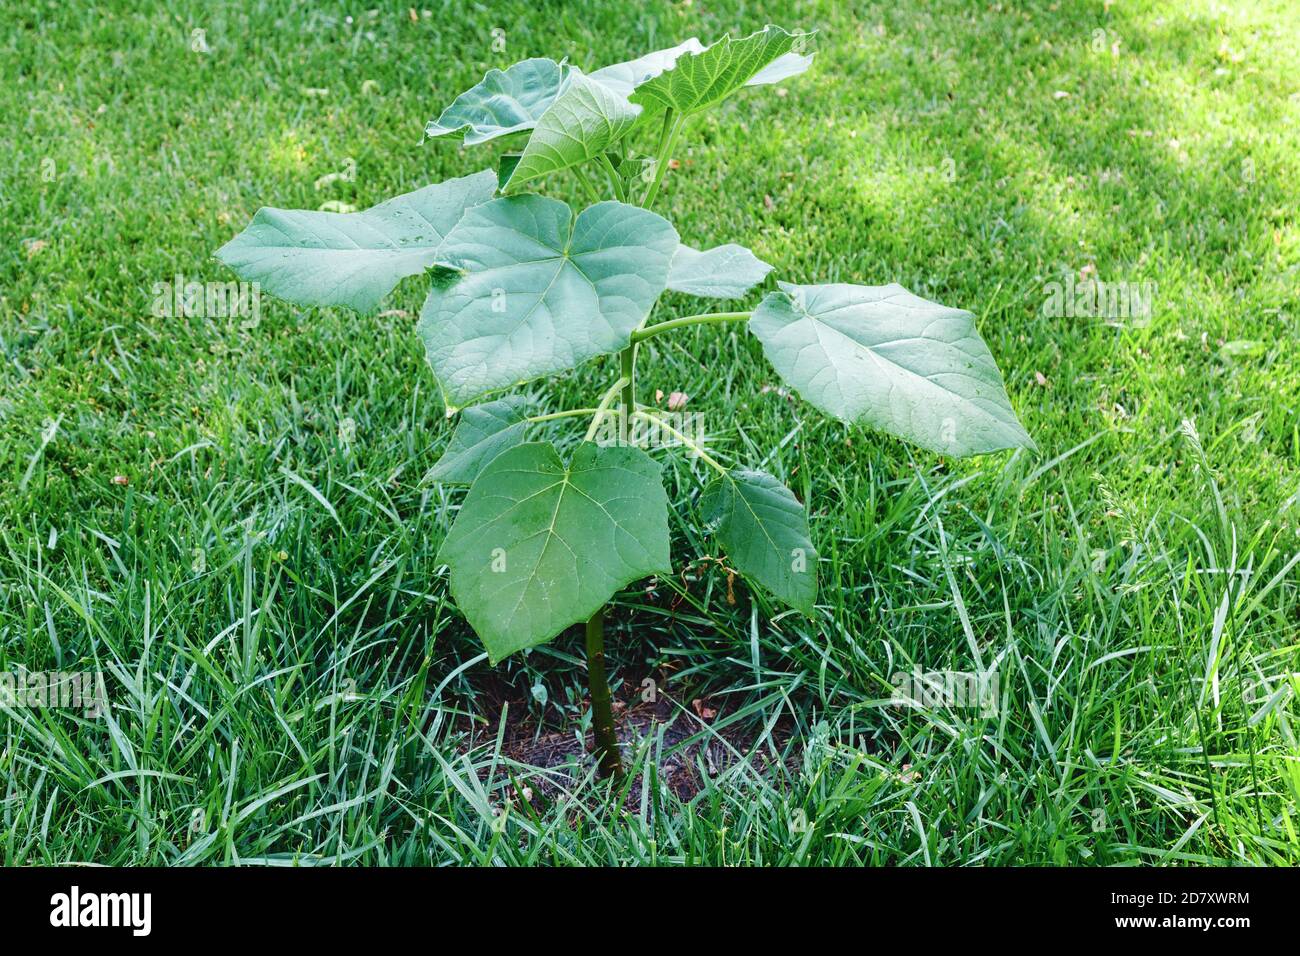 Newly planted Paulownia tomentosa or Empress tree. Young tree seedling of Paulownia tree in green grass lawn Stock Photo